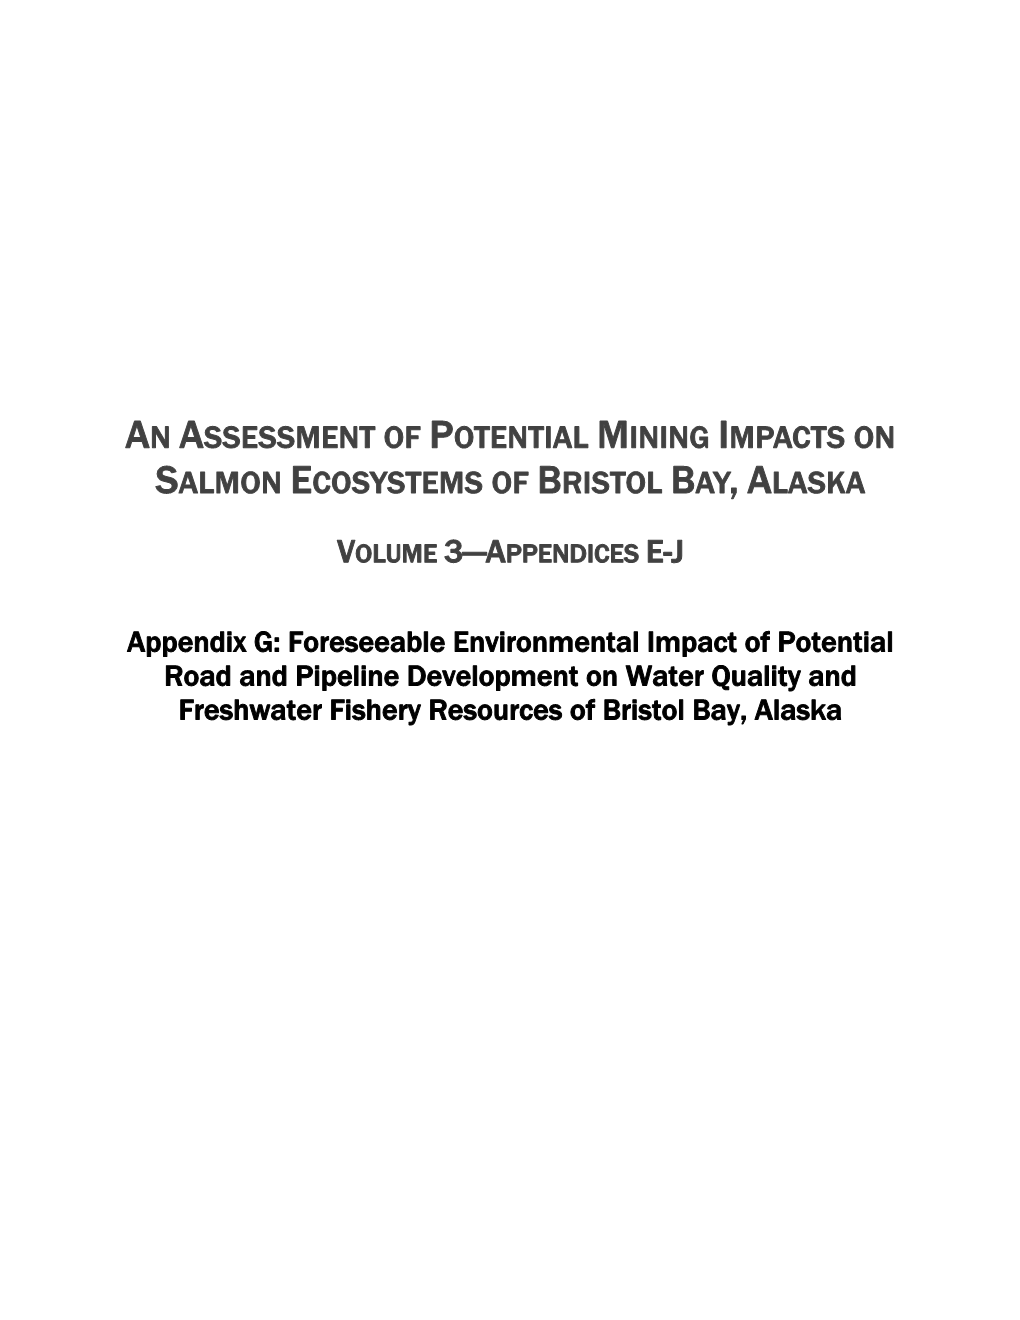 Foreseeable Environmental Impact of Potential Road and Pipeline Development on Water Quality and Freshwater Fishery Resources of Bristol Bay, Alaska